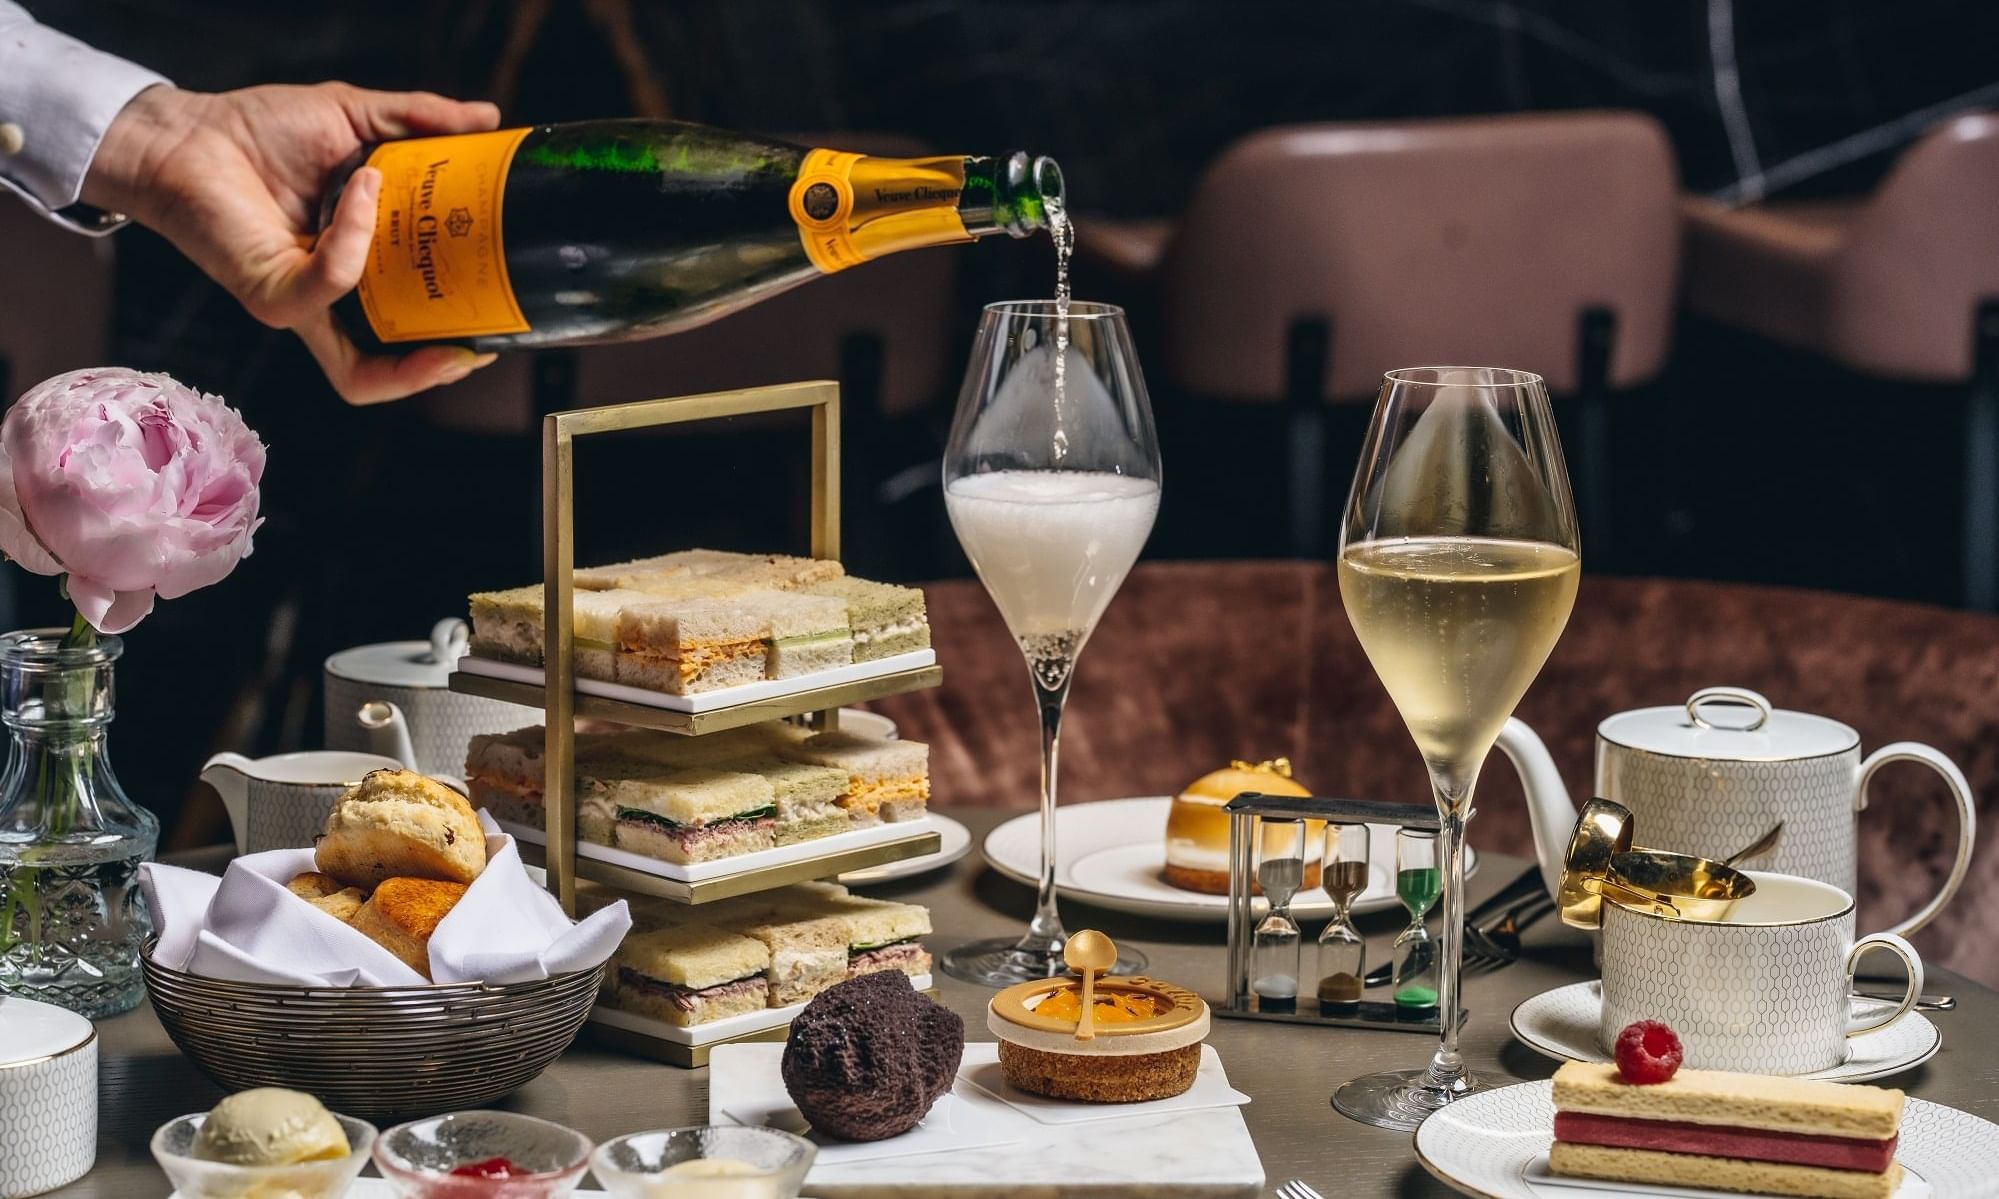 Champagne & afternoon tea served at The Londoner Hotel